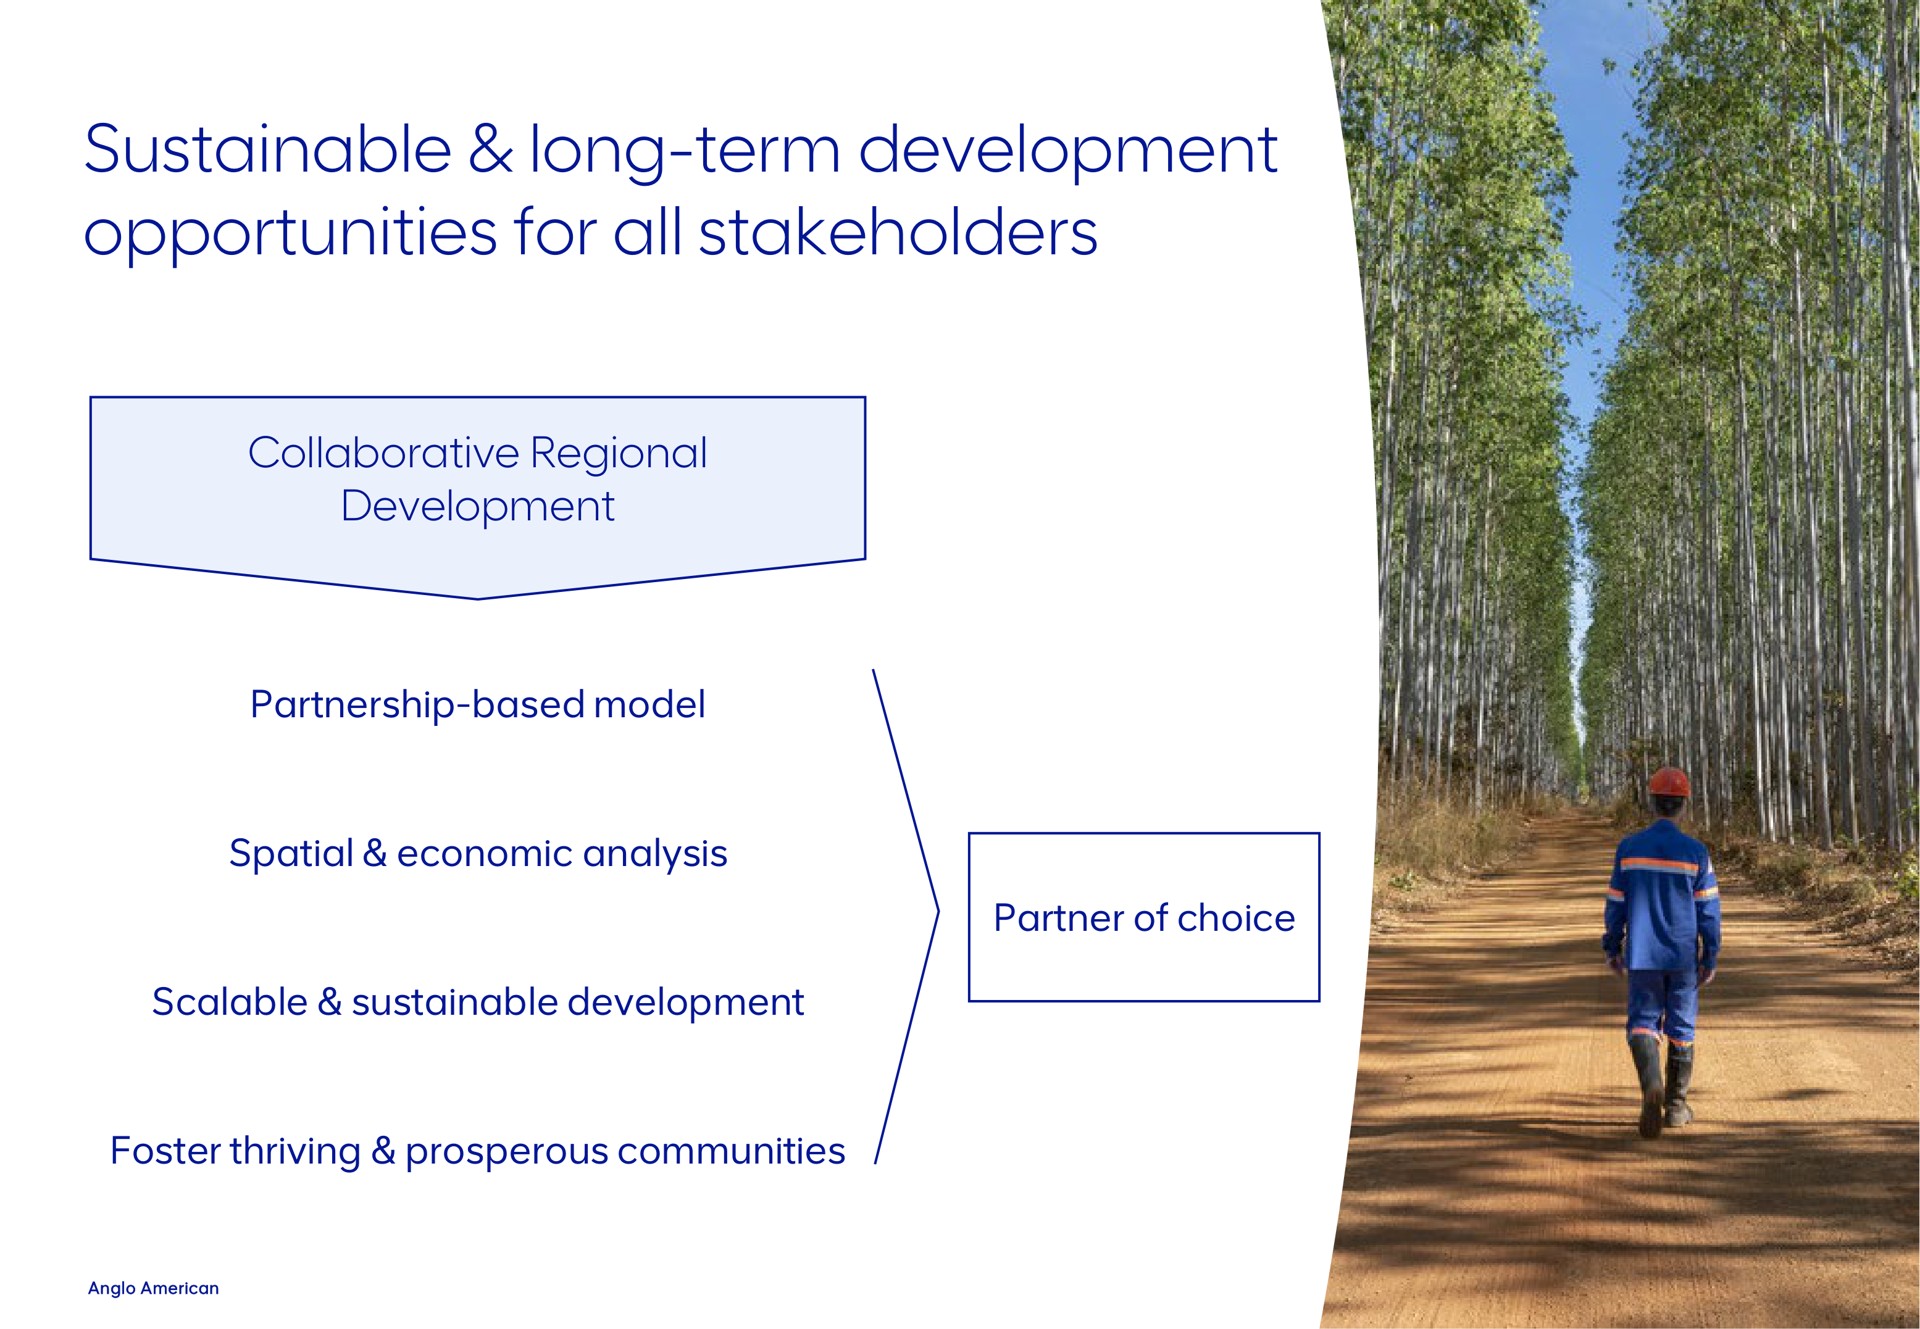 sustainable long term development opportunities for all stakeholders | AngloAmerican